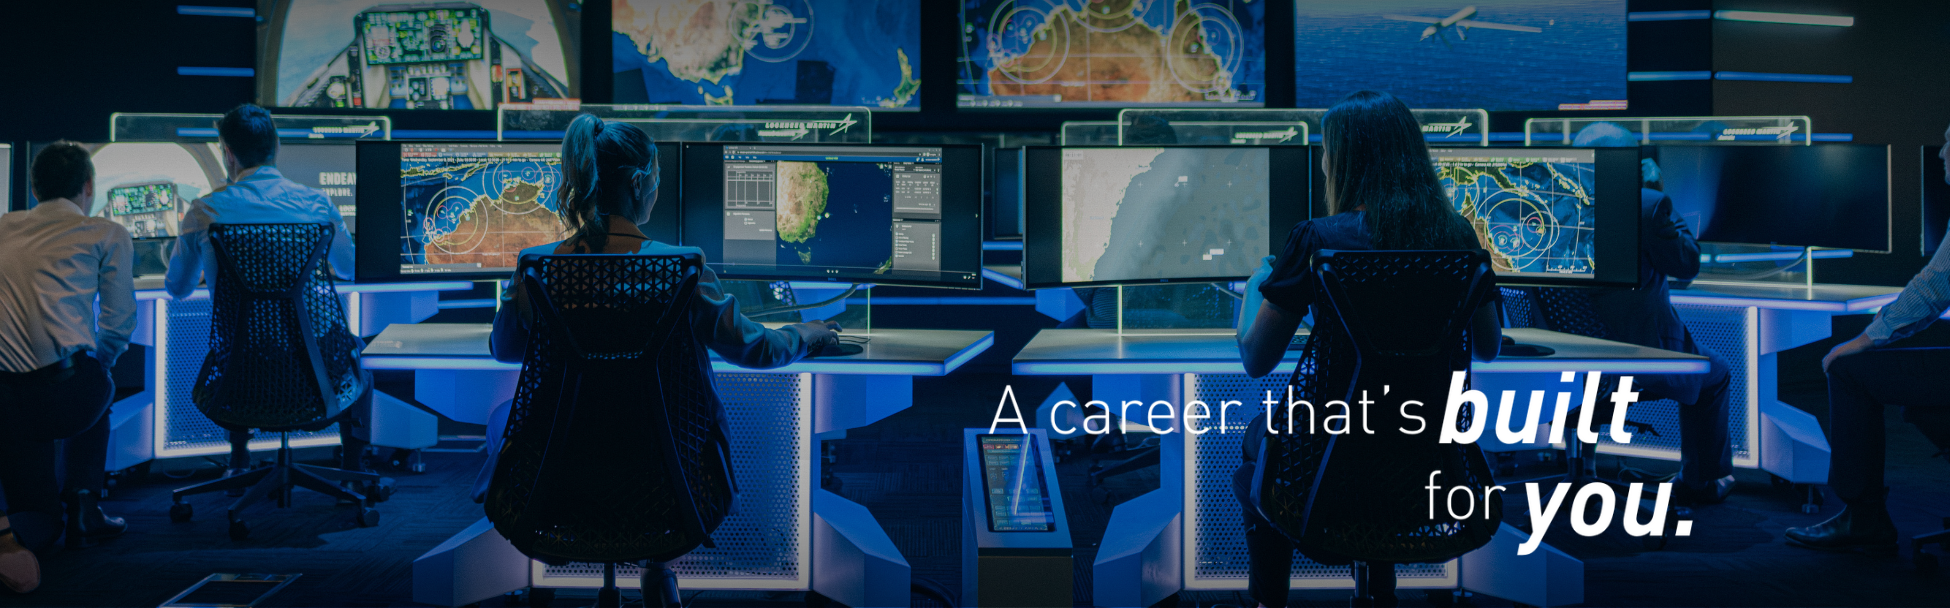 A career that's built for you.